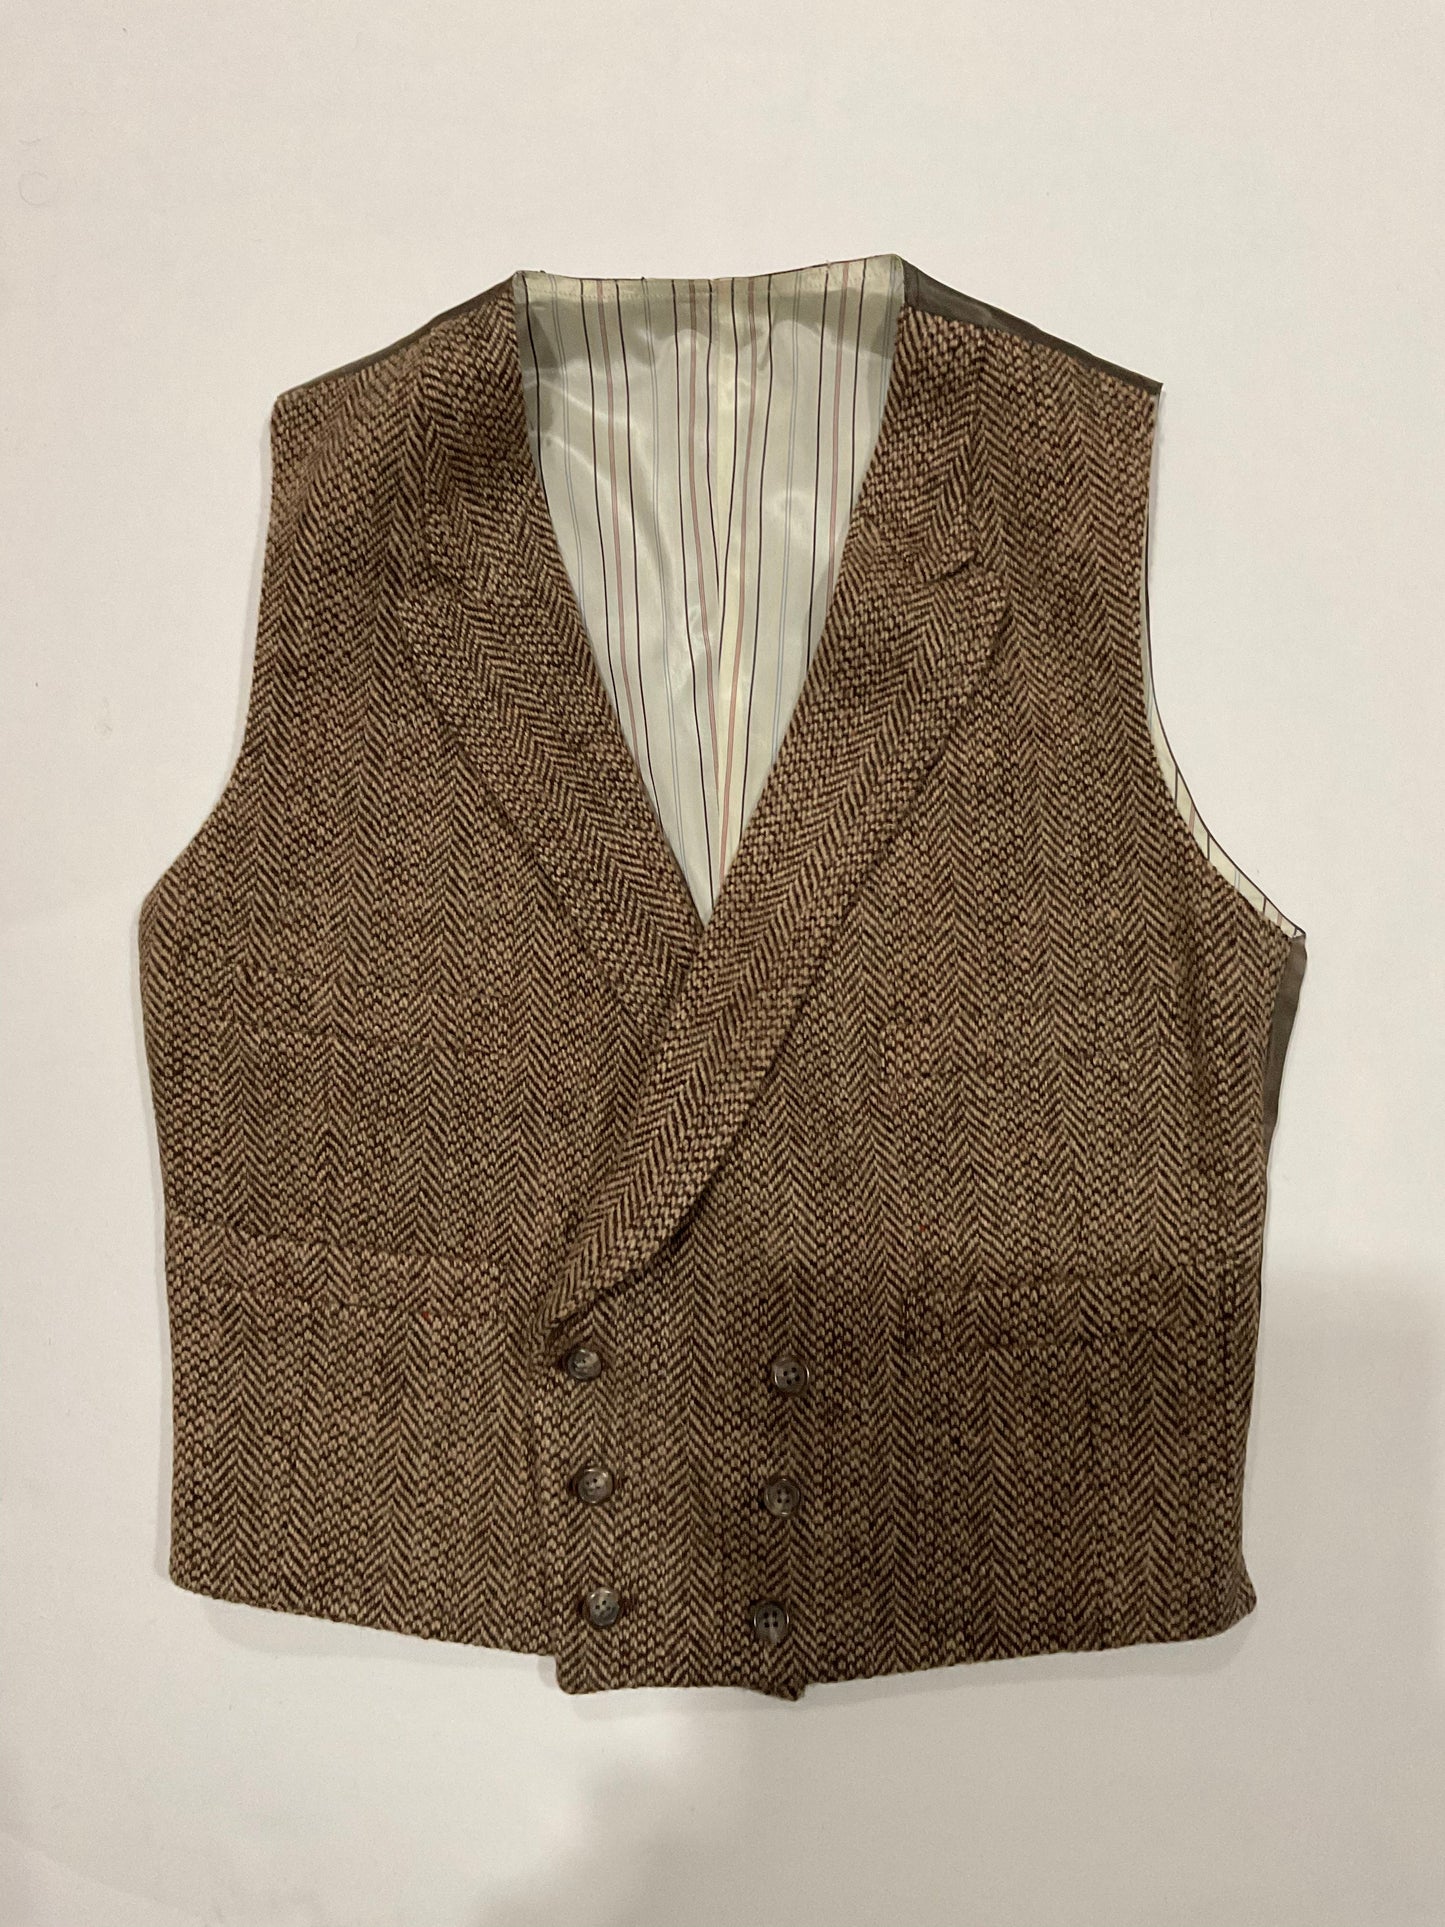 R P VEST / DOUBLE BREASTED / BROWN TWEED / SMALL / FABRIC MADE IN ENGLAND